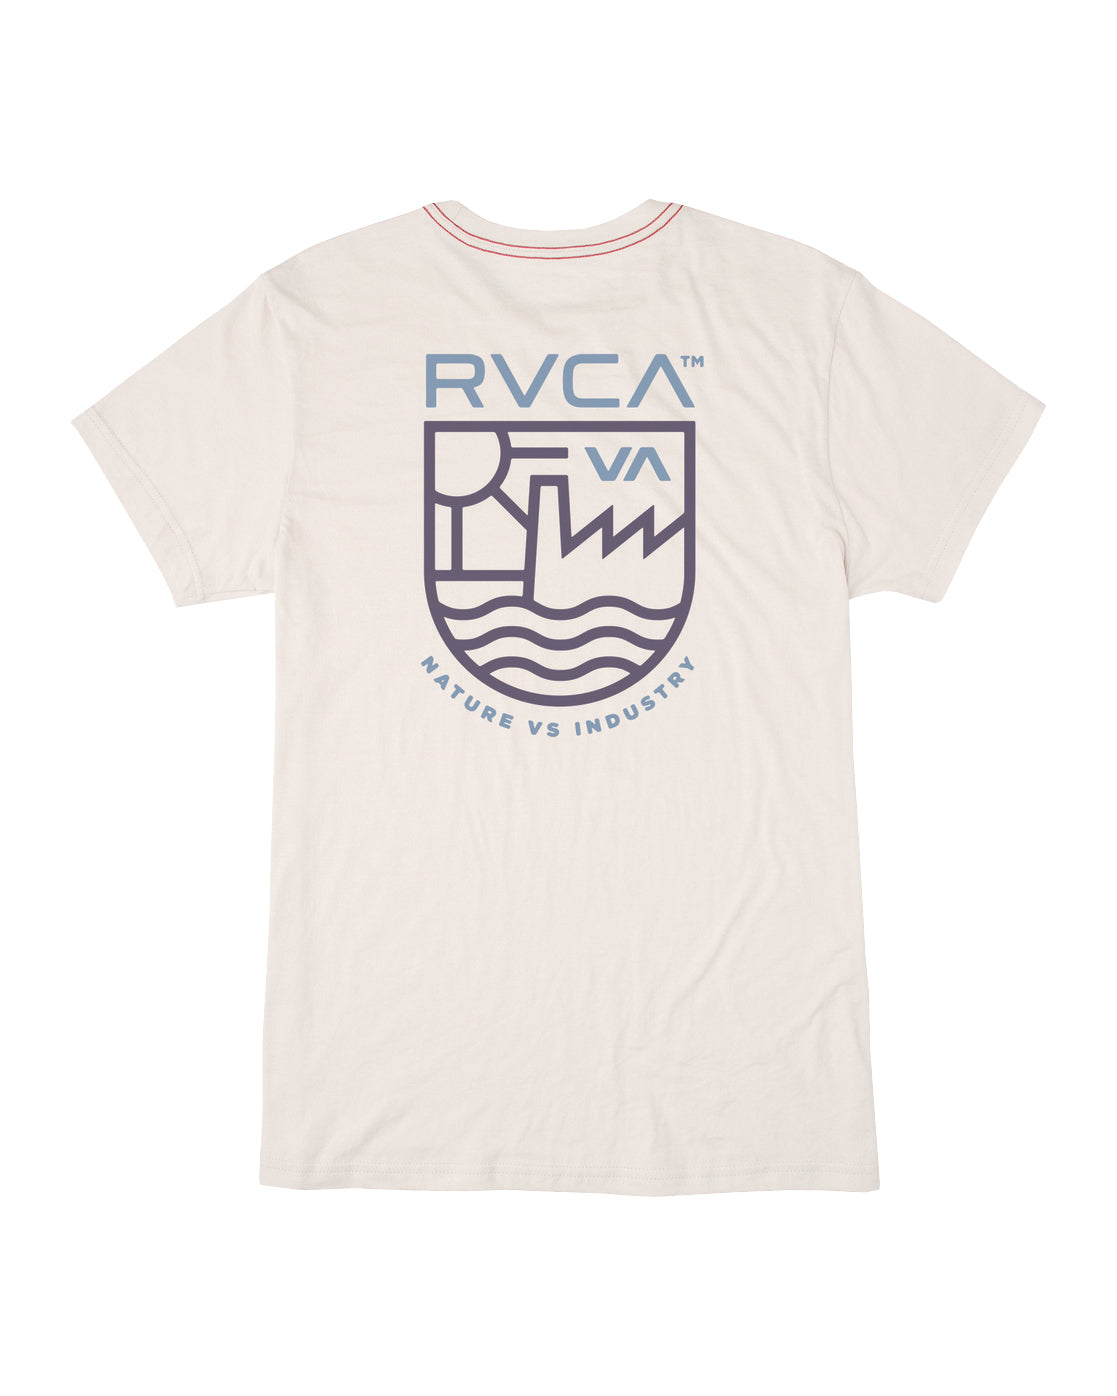 RVCA Dept of Ind SS Tee